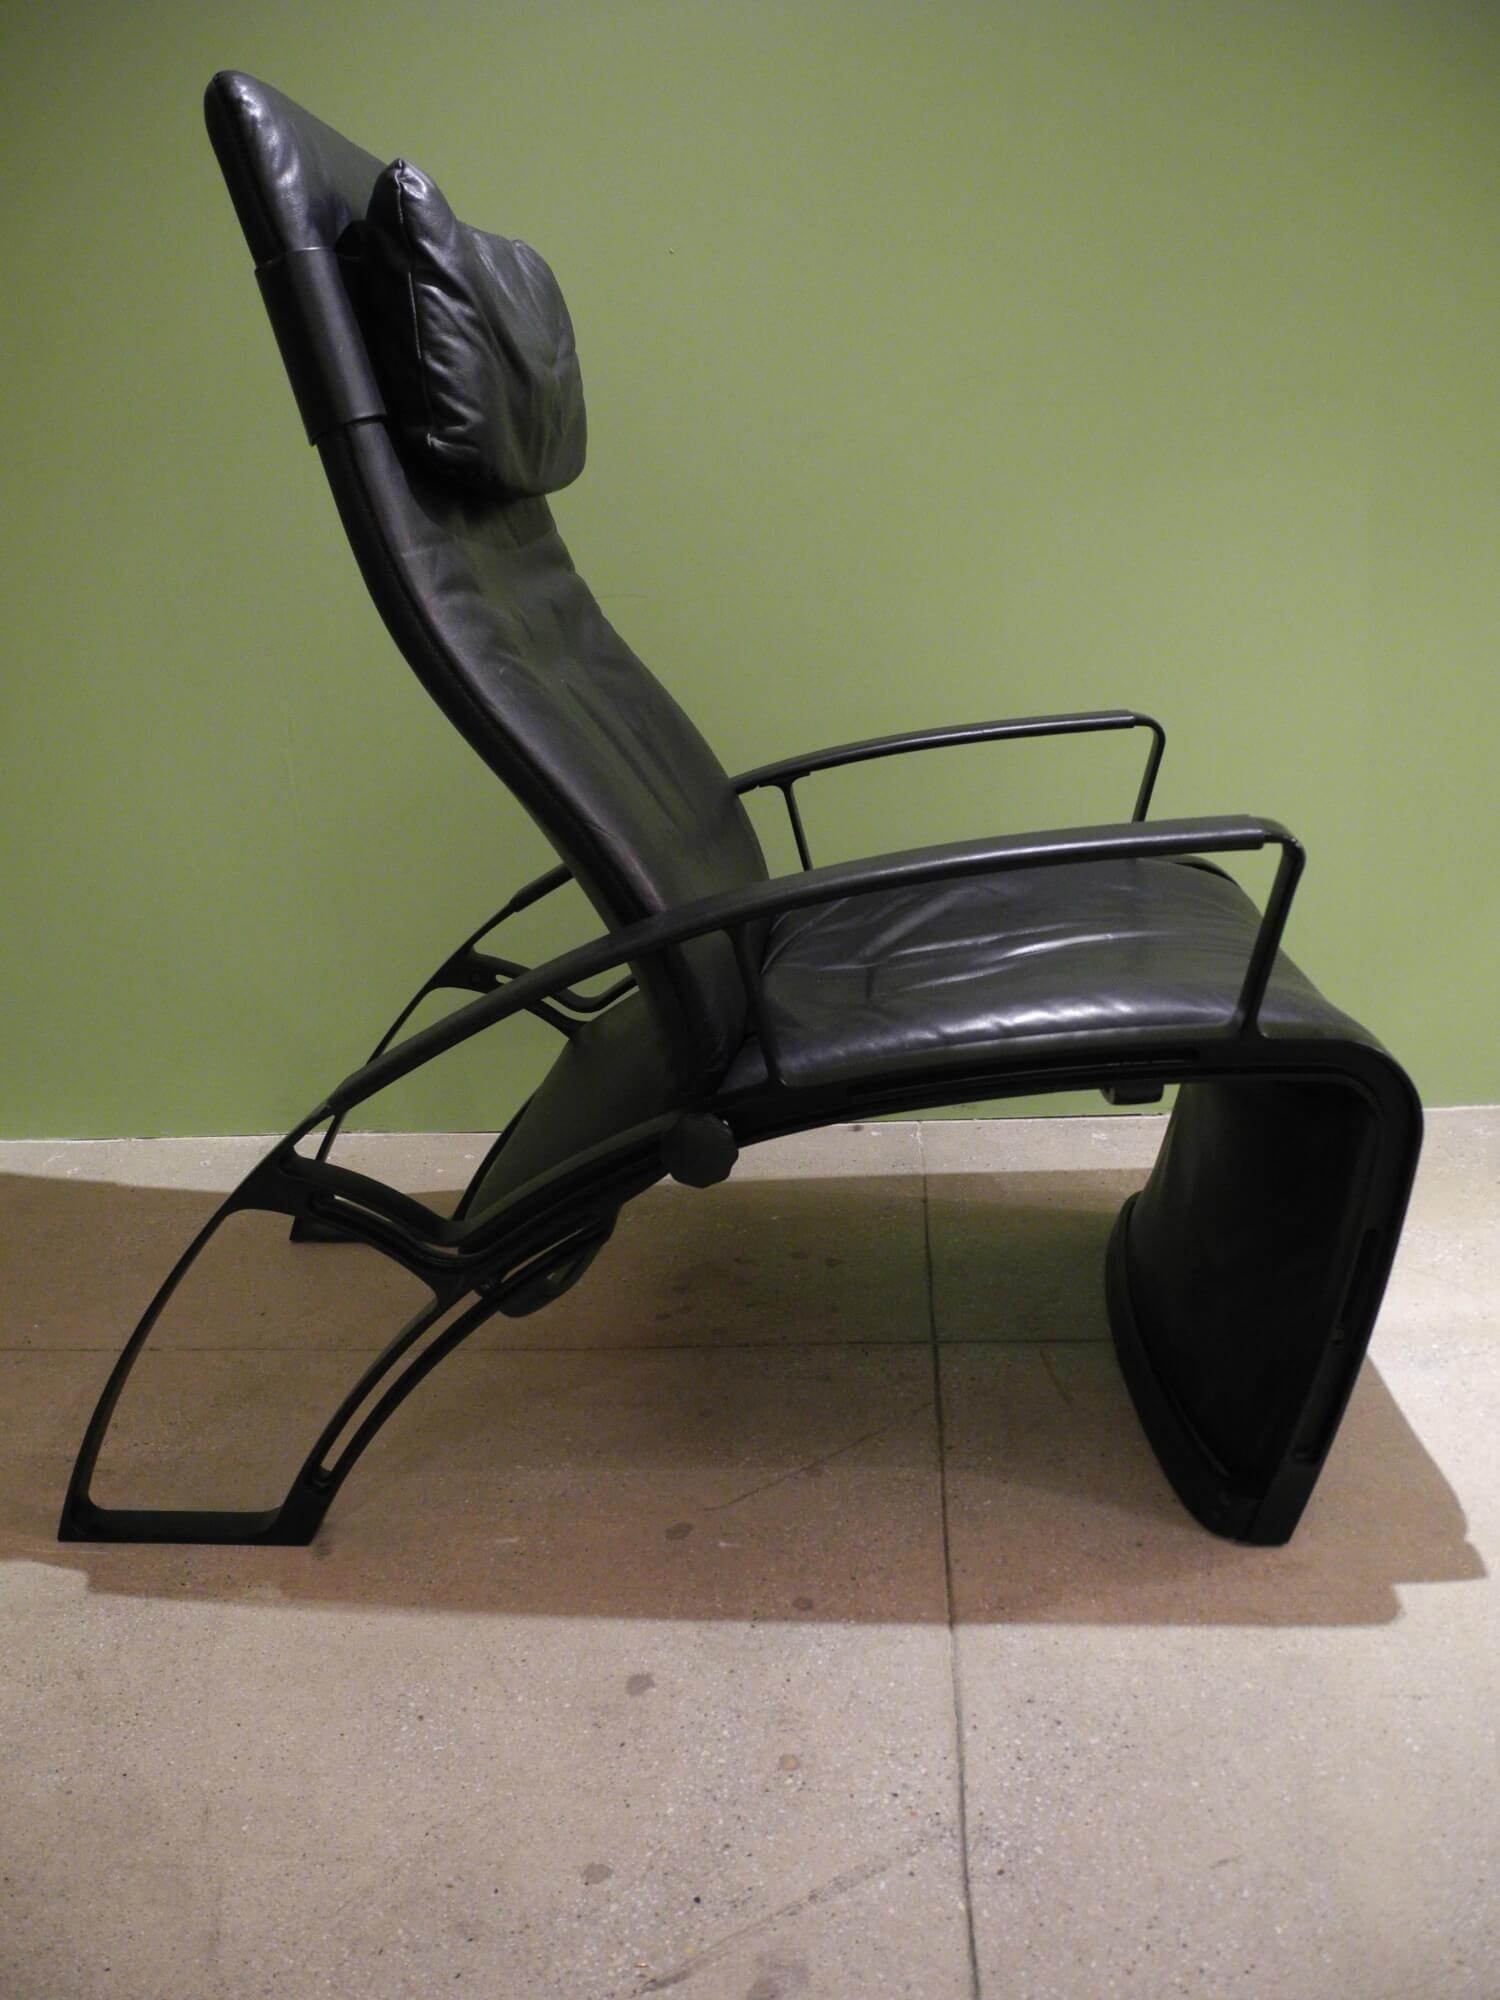 Porsche IP 84S lounge chair was designed by Ferdinand Alexander Porsche in 1984. Fine construction methods, stunning aesthetics and innovation are the most important characteristics of this recliner chair.

A lot of science was involved in this